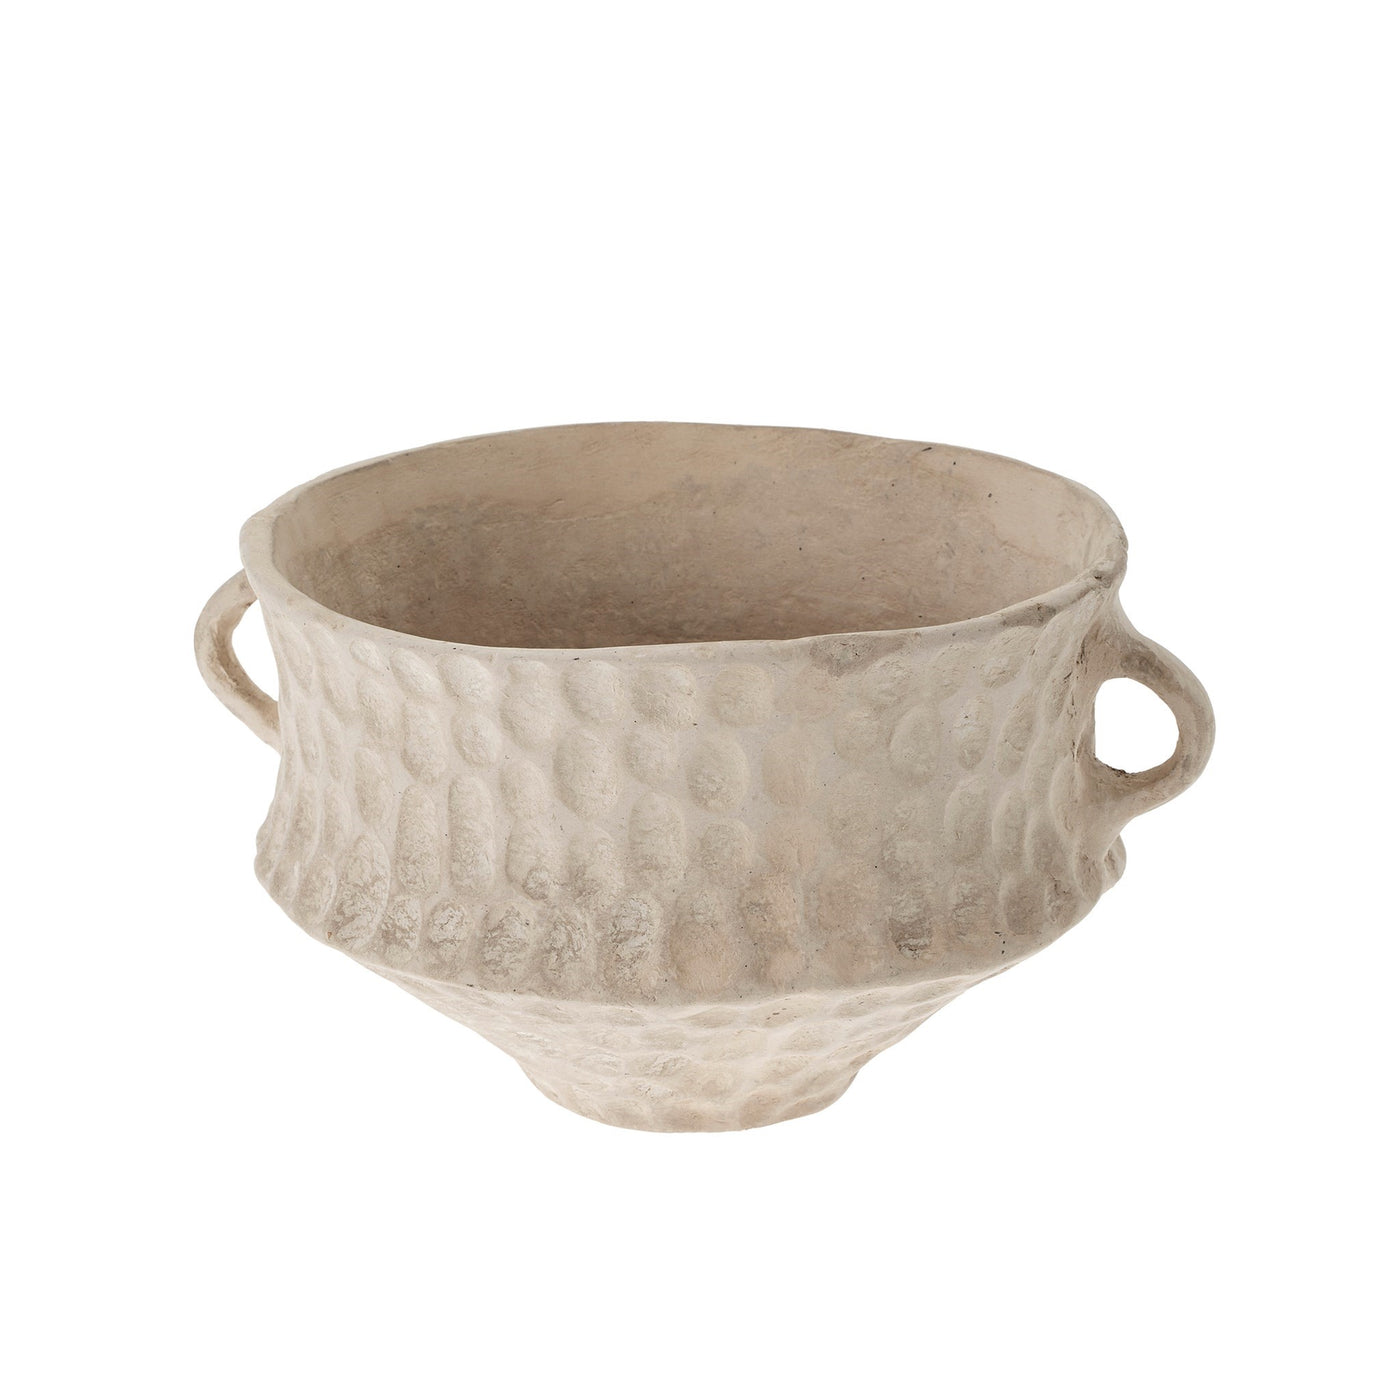 Cascade Paper Mache Urn at Avalon Willow Home:  handcrafted from textural papier maché, with a chalky, limewash-like dimpled texture and characterful handles. Made from recycled newspaper, it's entirely natural and sustainable. Can be used as a decorative bowl.